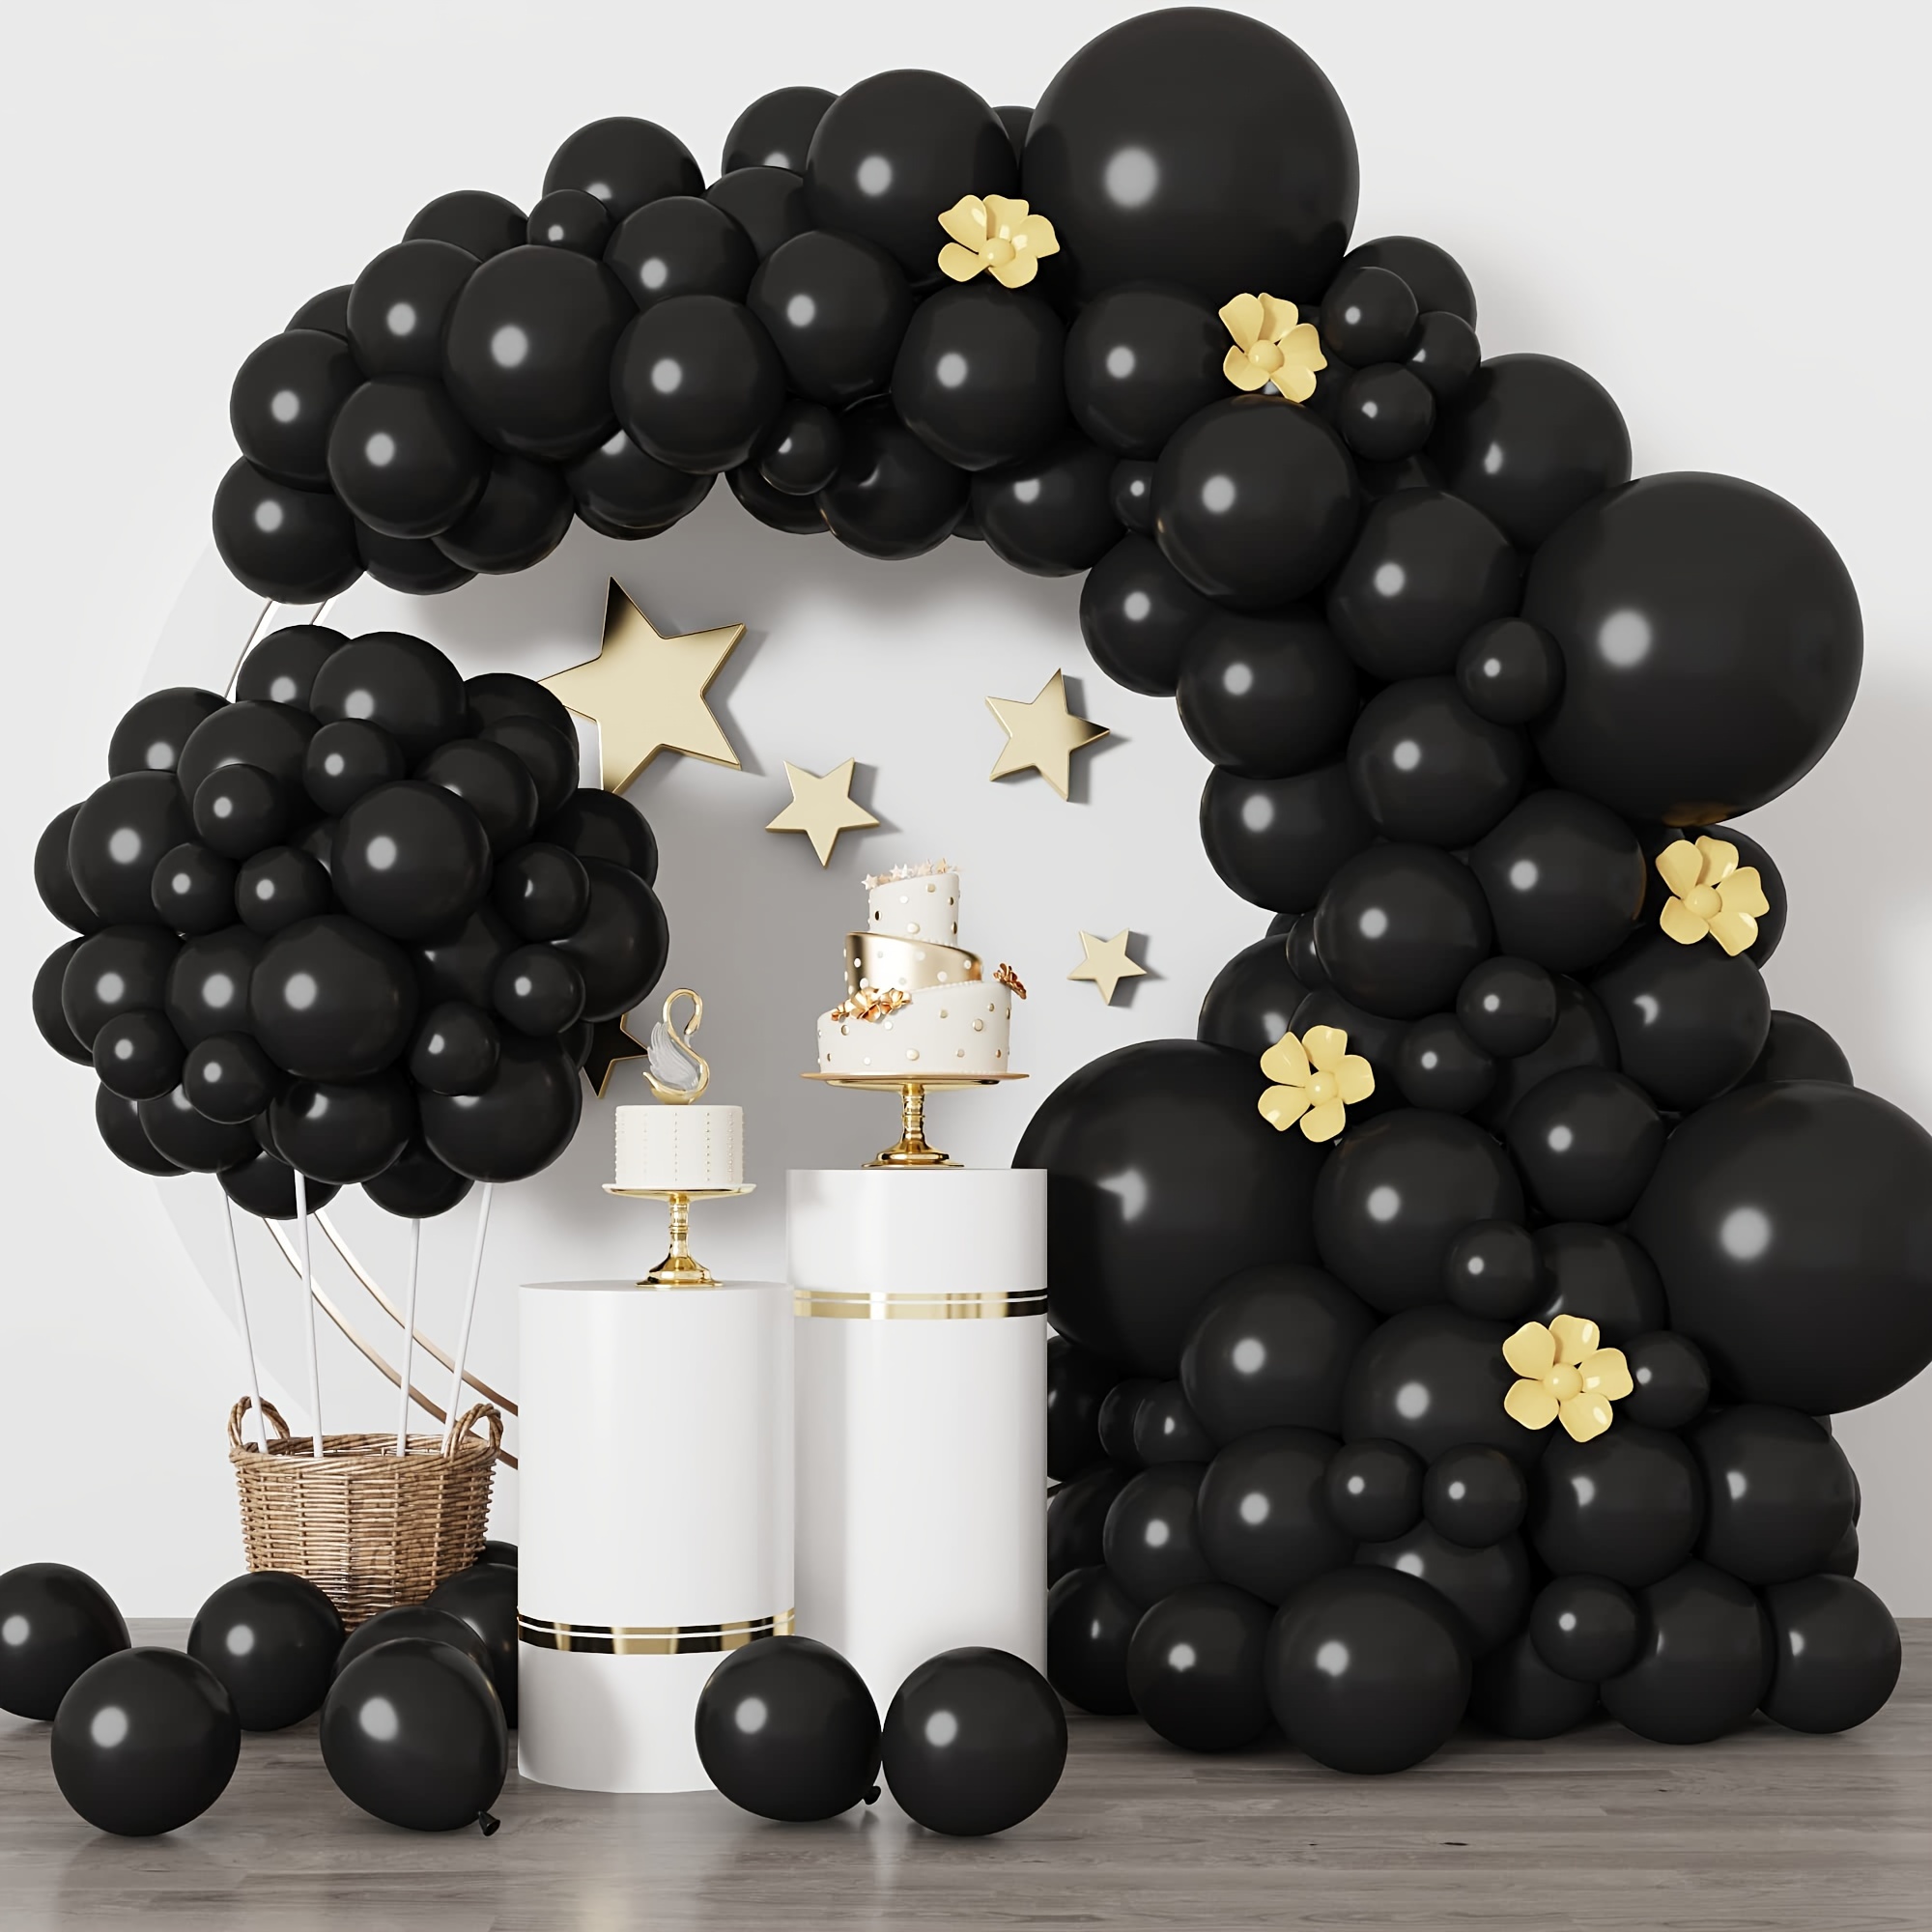 

138-piece Black Latex Balloon Set - Assorted Sizes 5", 10", 12", 18" - Perfect For Birthdays, Graduations, Weddings, Anniversaries & Retirement Parties - Includes Curling Ribbon